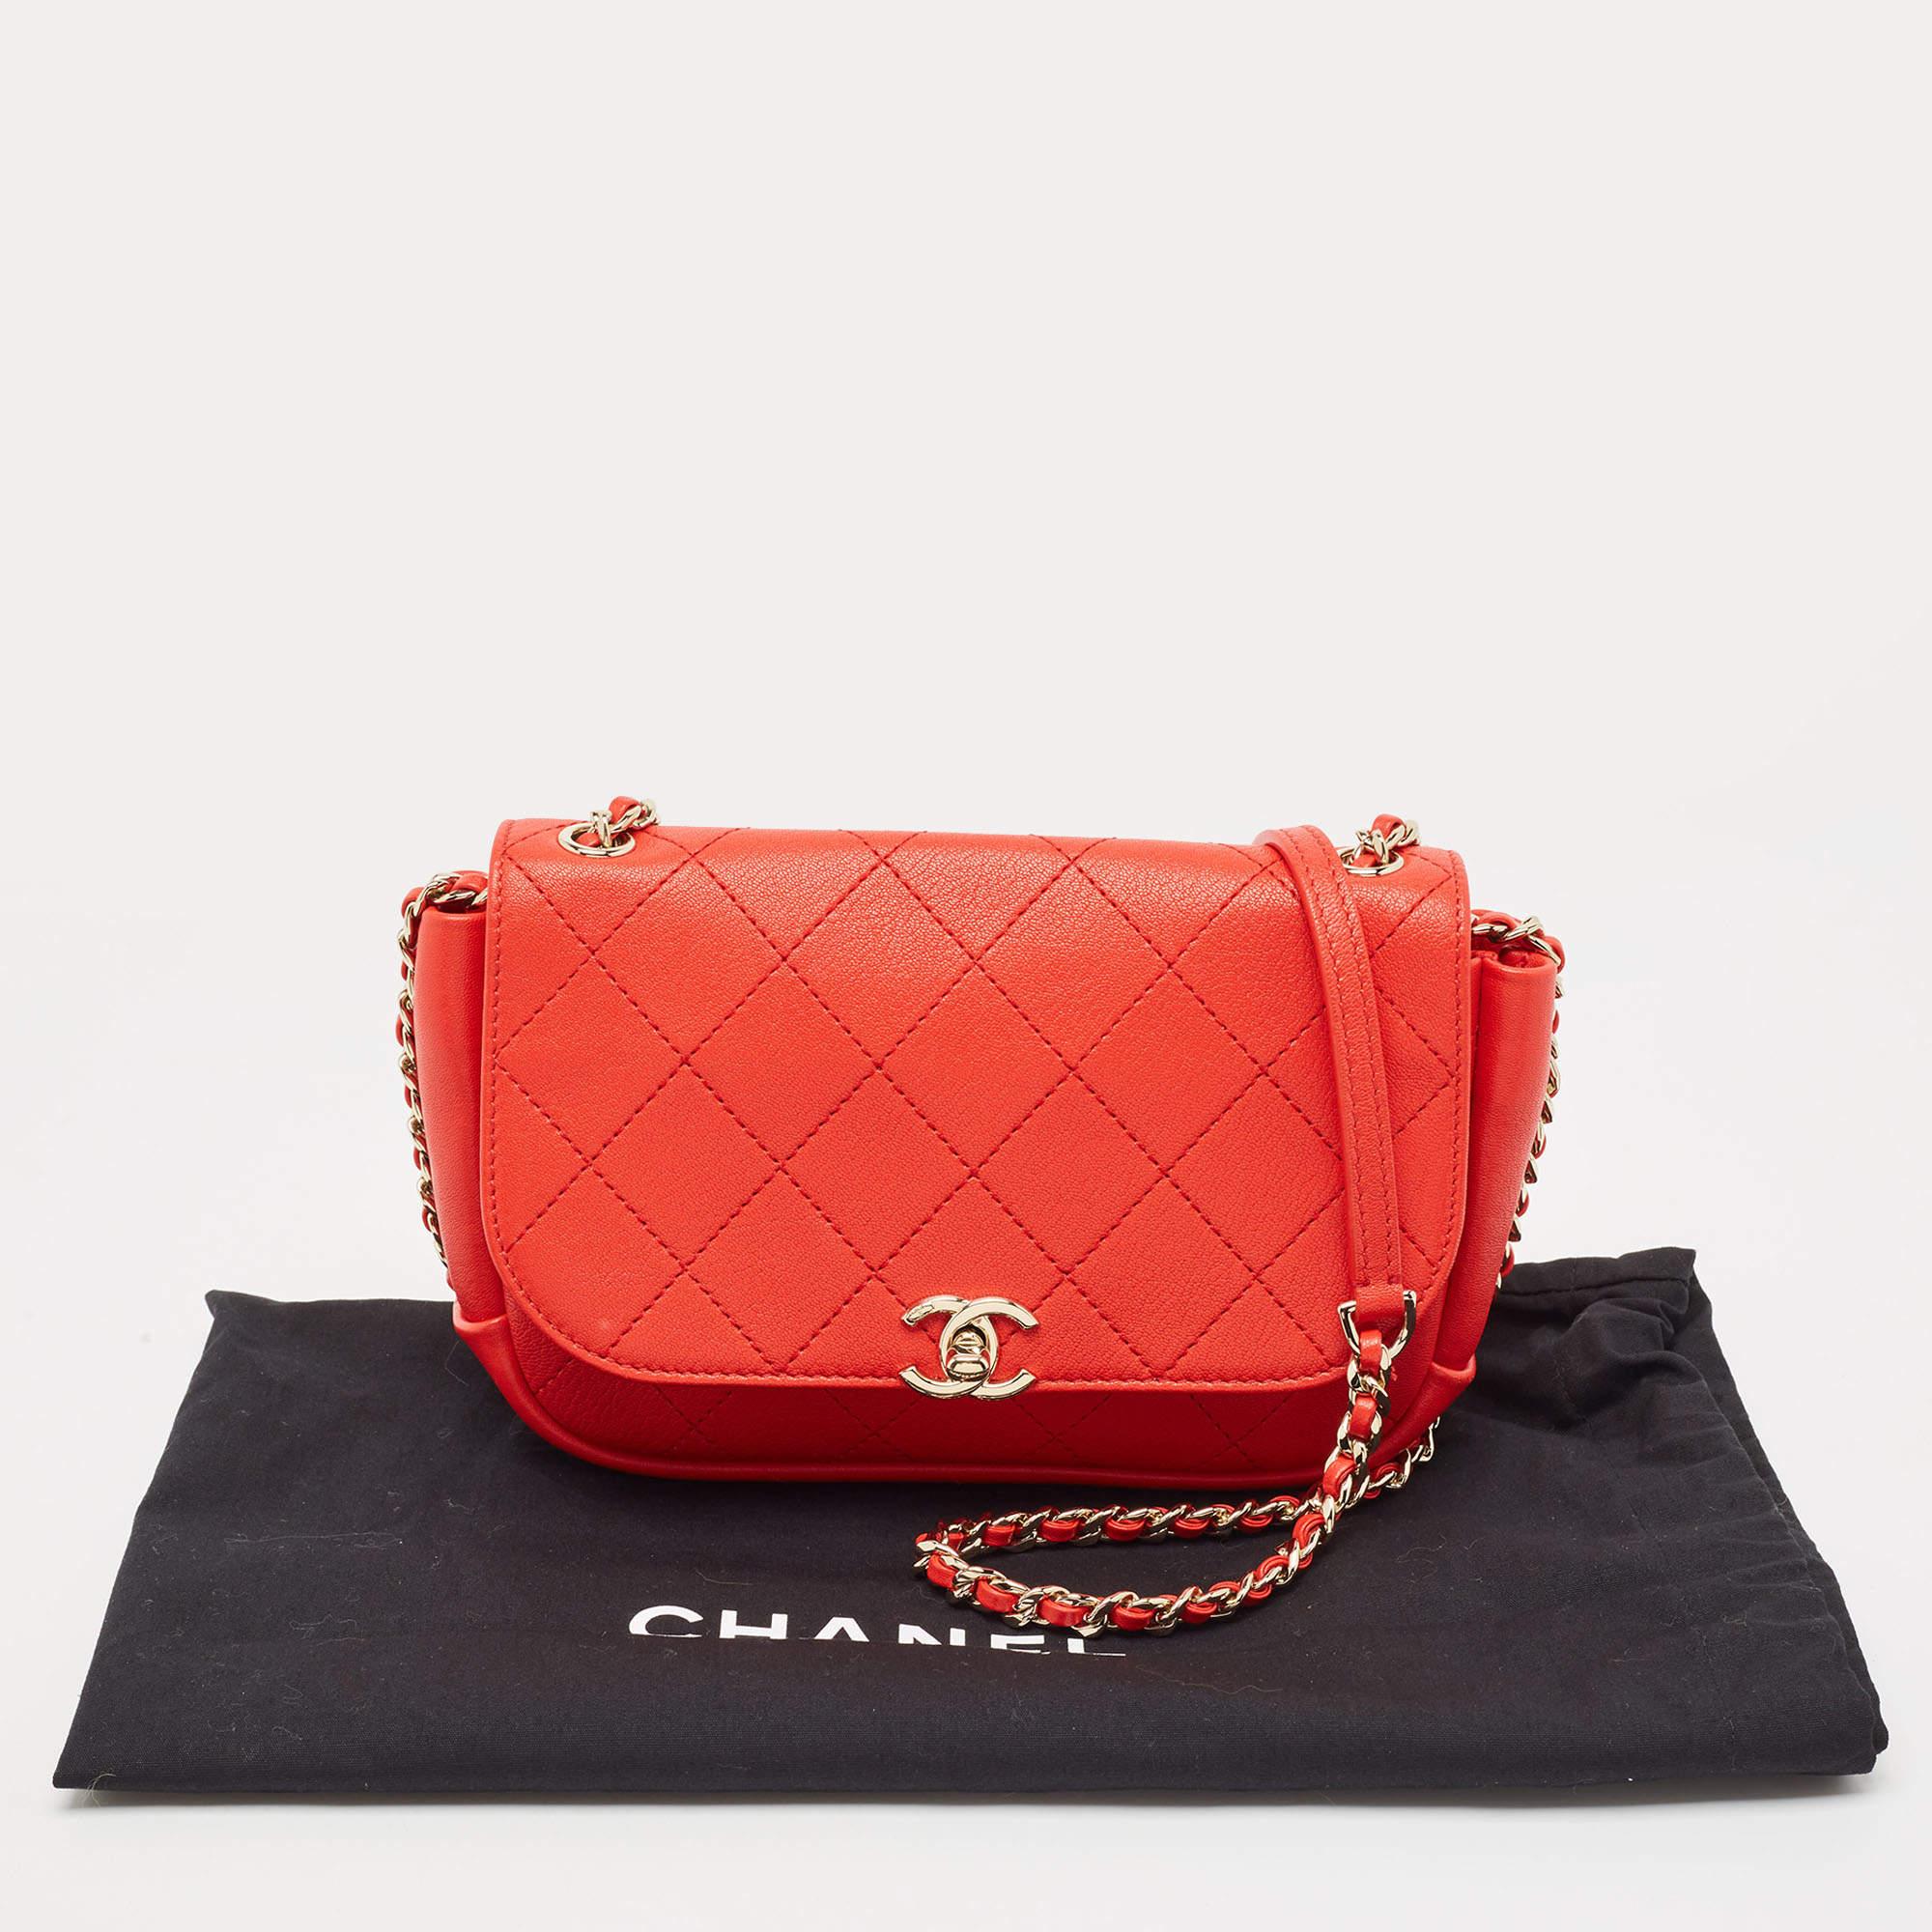 Chanel Red Quilted Leather Small Casual Trip Flap Bag For Sale 4